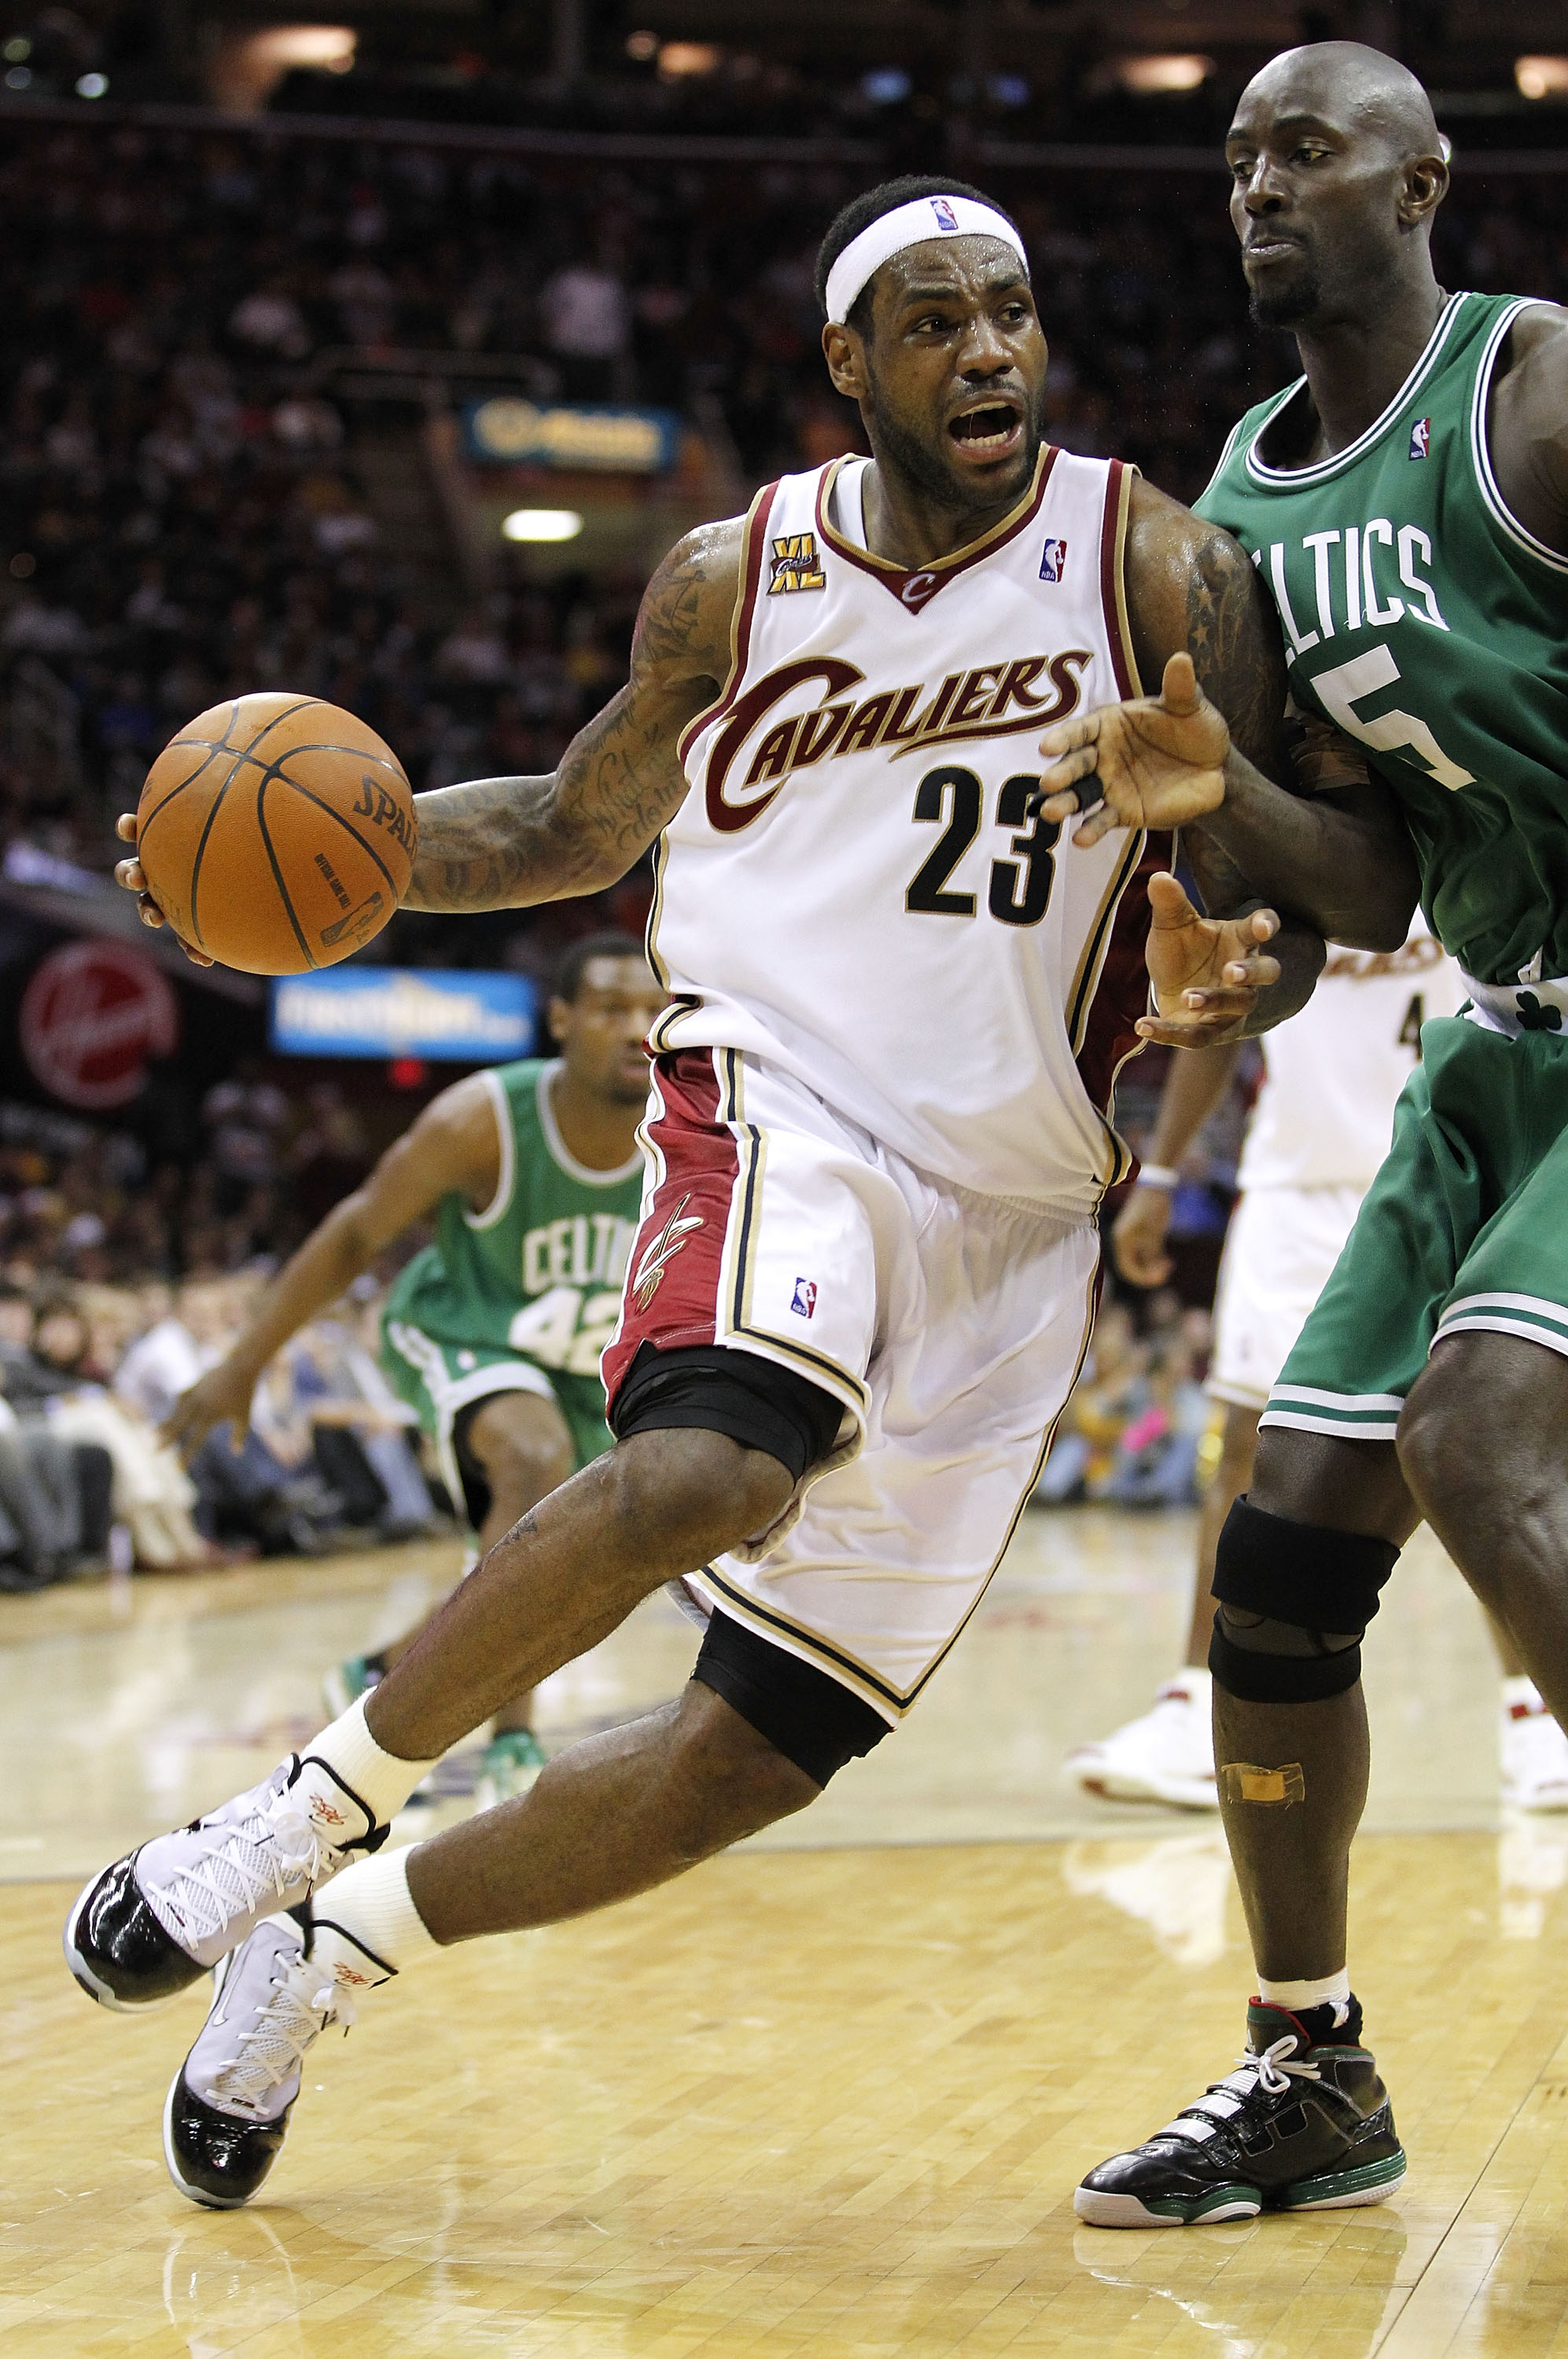 CLEVELAND - MAY 11:  LeBron James #23 of the Cleveland Cavaliers drives around Kevin Garnett #5 of the Boston Celtics during Game Five of the Eastern Conference Semifinals during the 2010 NBA Playoffs at Quicken Loans Arena on May 11, 2010 in Cleveland, O